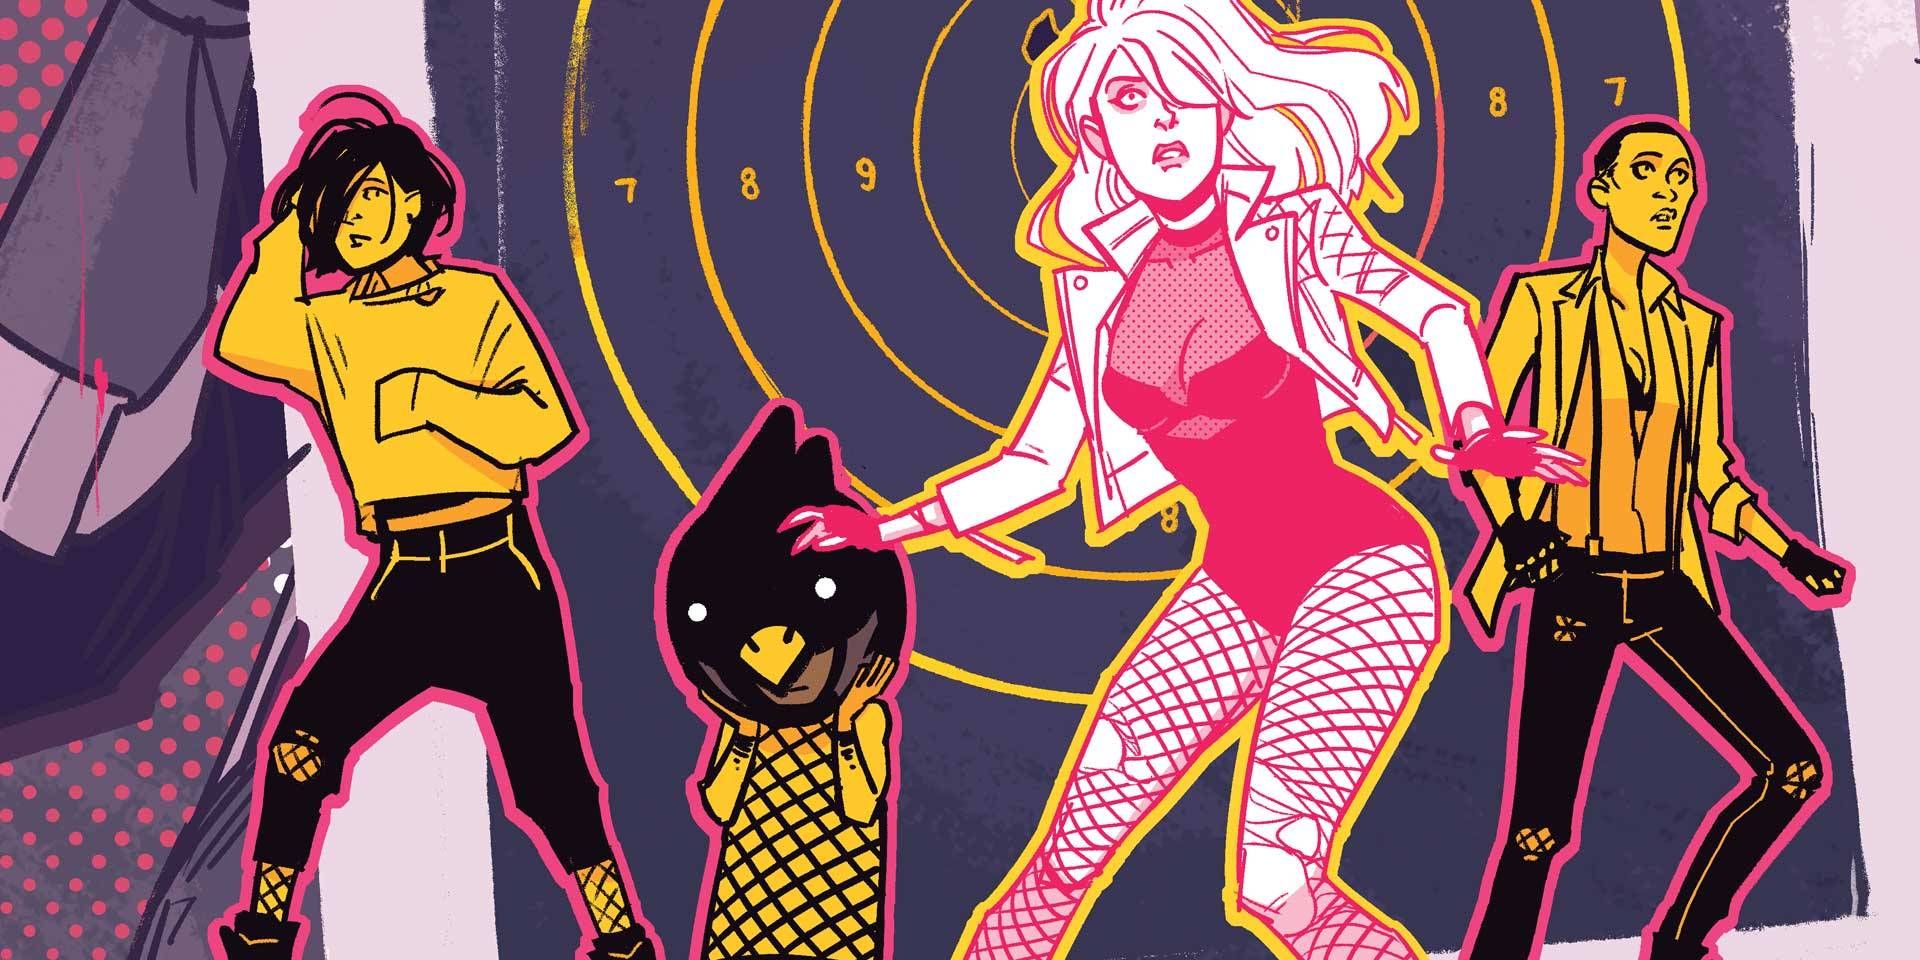 The Black Canary band, by Annie Wu